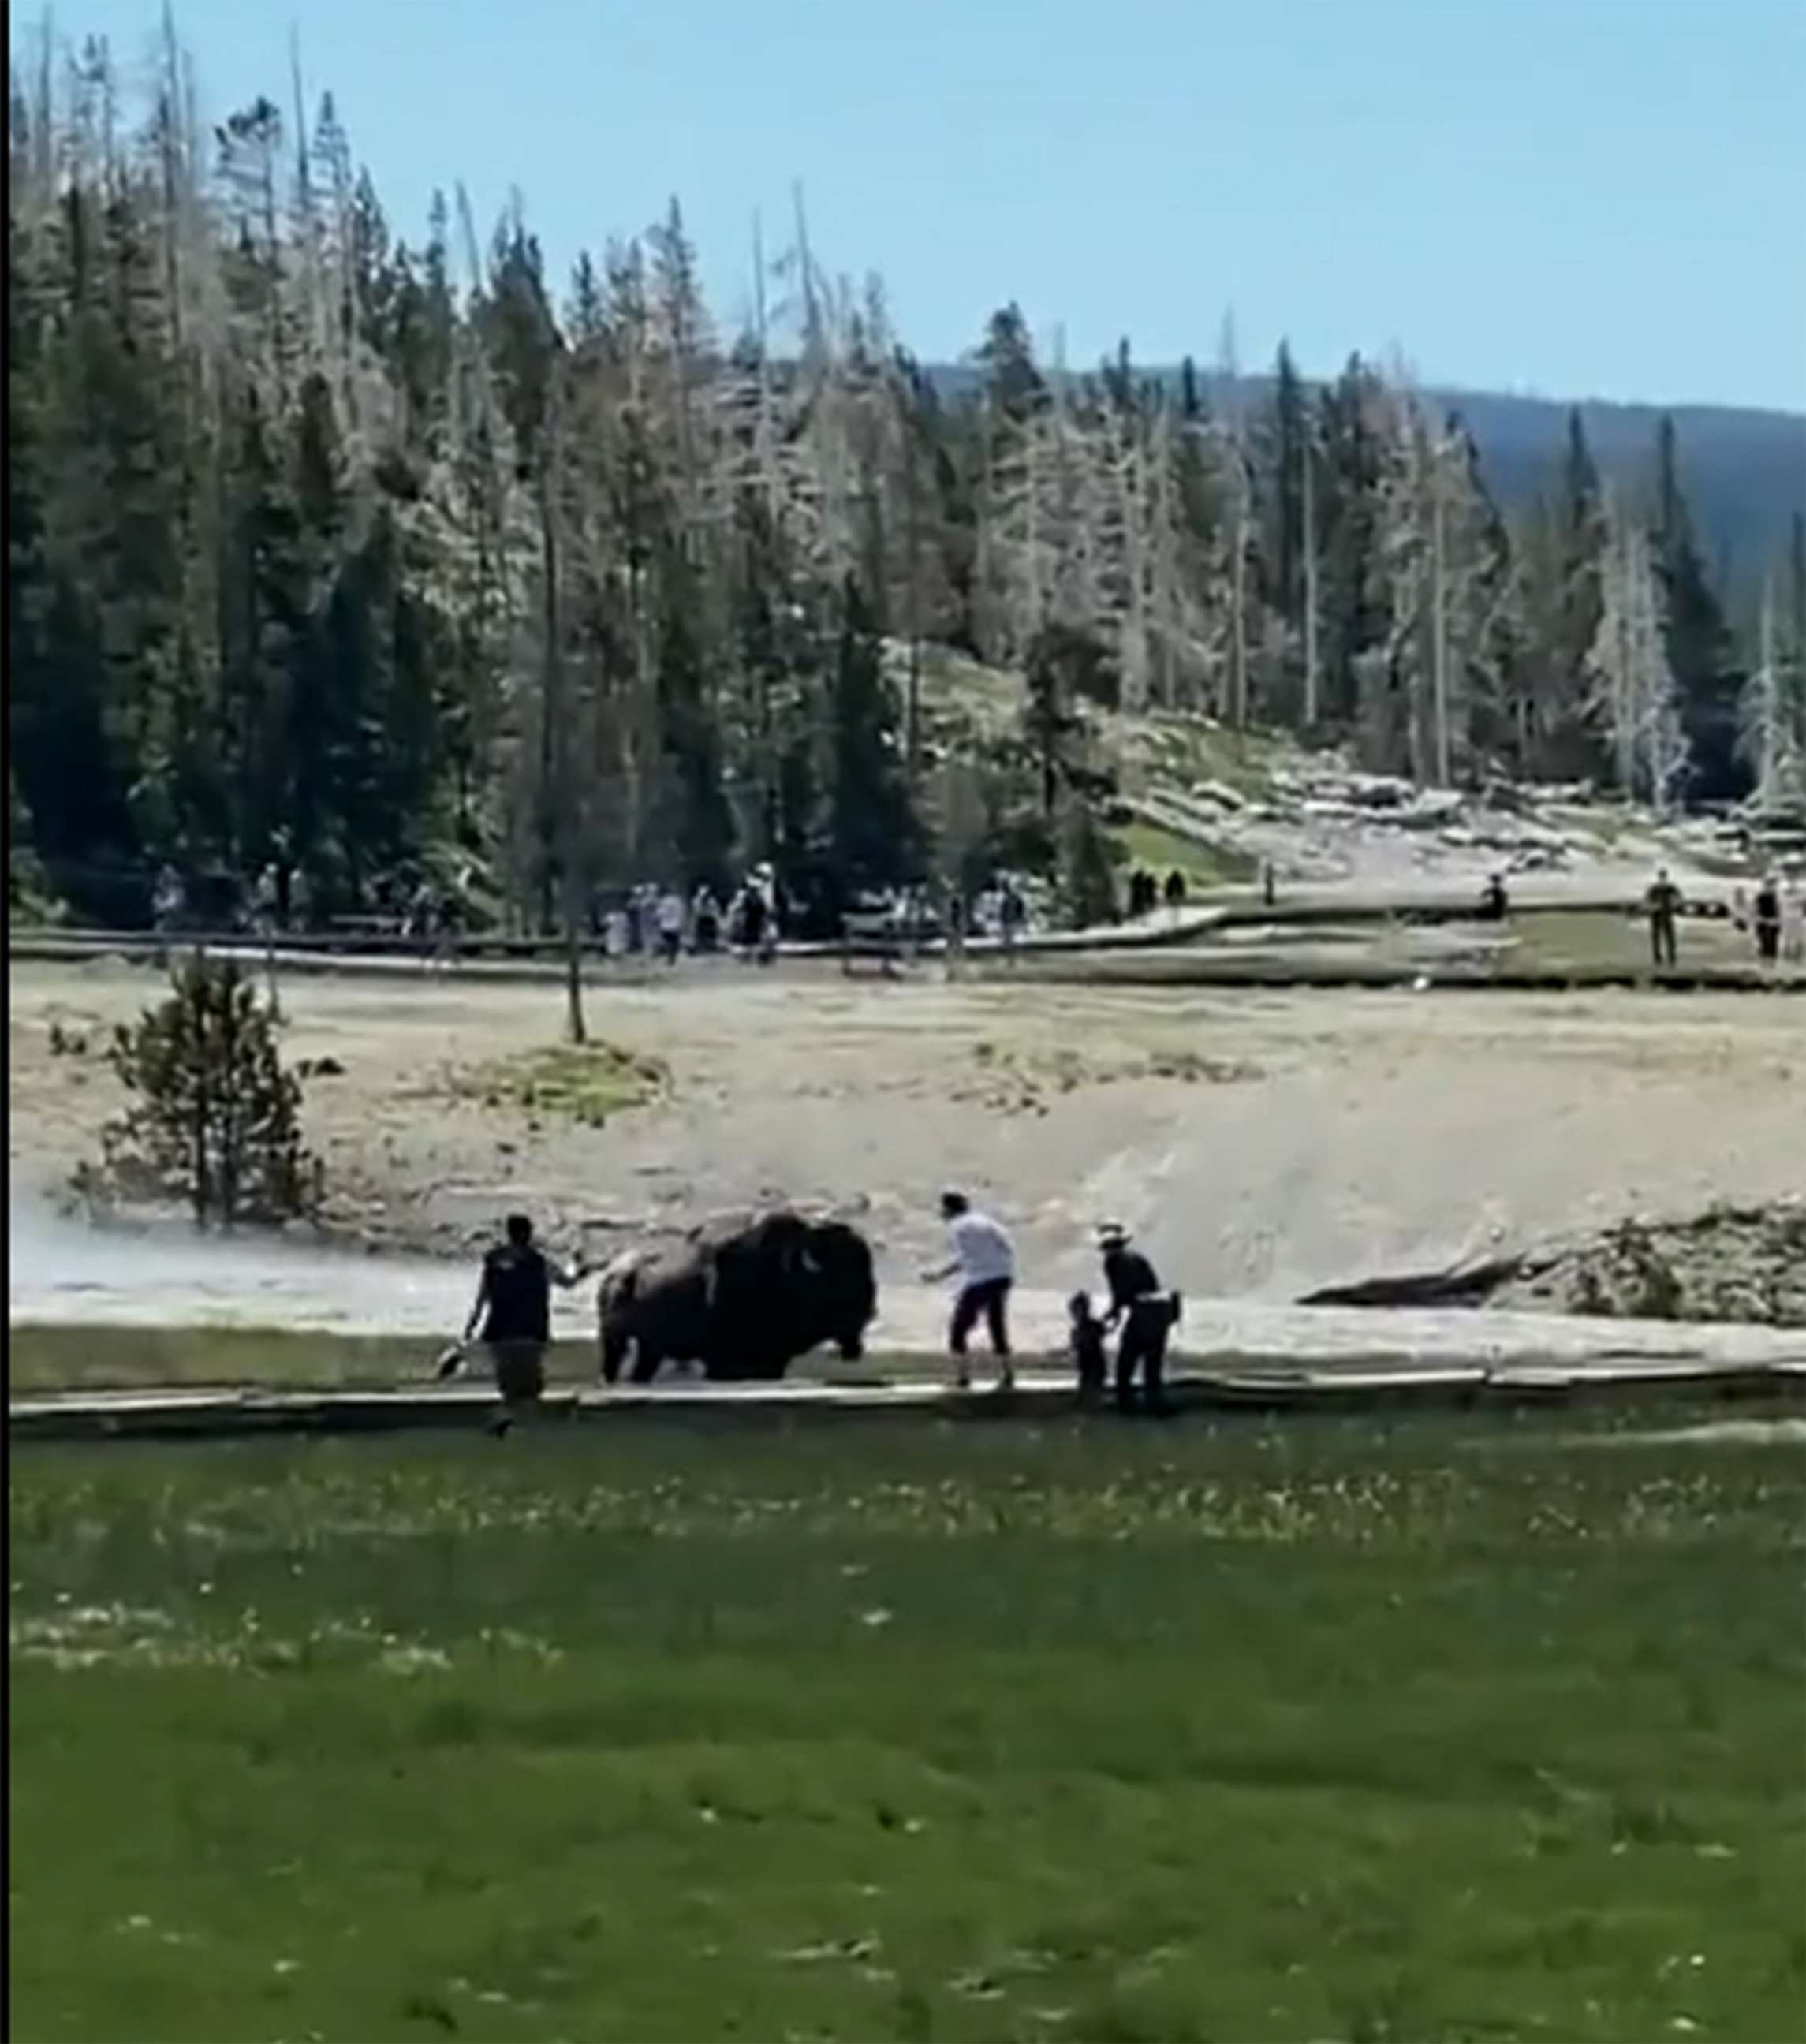 PHOTO: A still from video shows a group's encounter with a bison during which a man was gored by the animal in Yellowstone National Park, June 27, 2022.